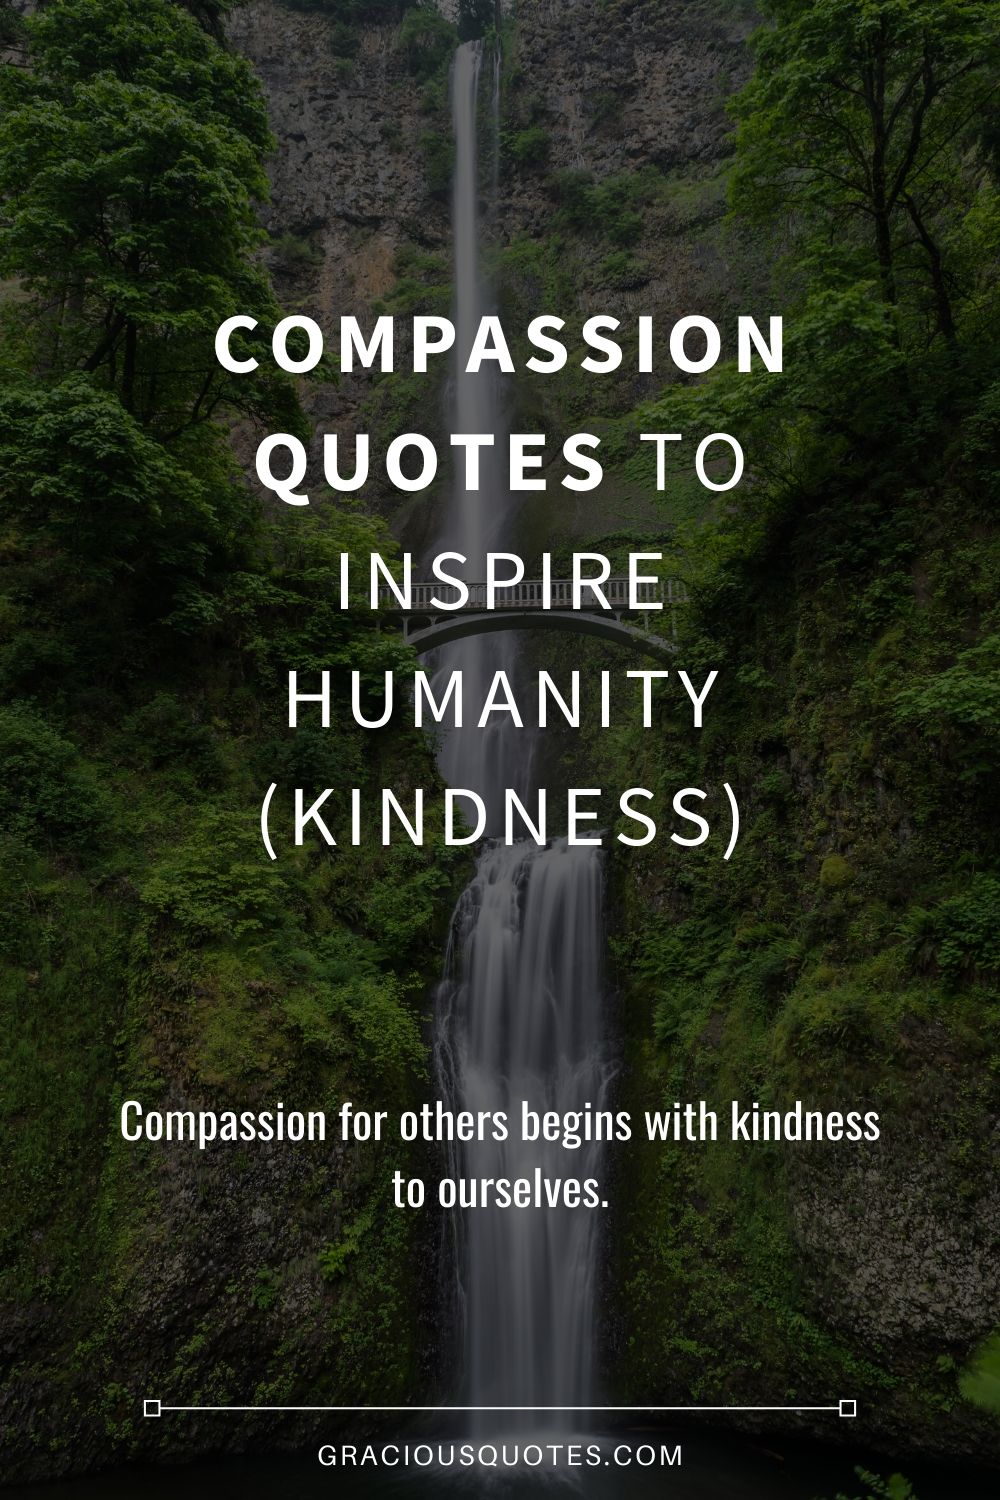 Compassion Quotes to Inspire Humanity (KINDNESS) - Gracious Quotes (EDITED)